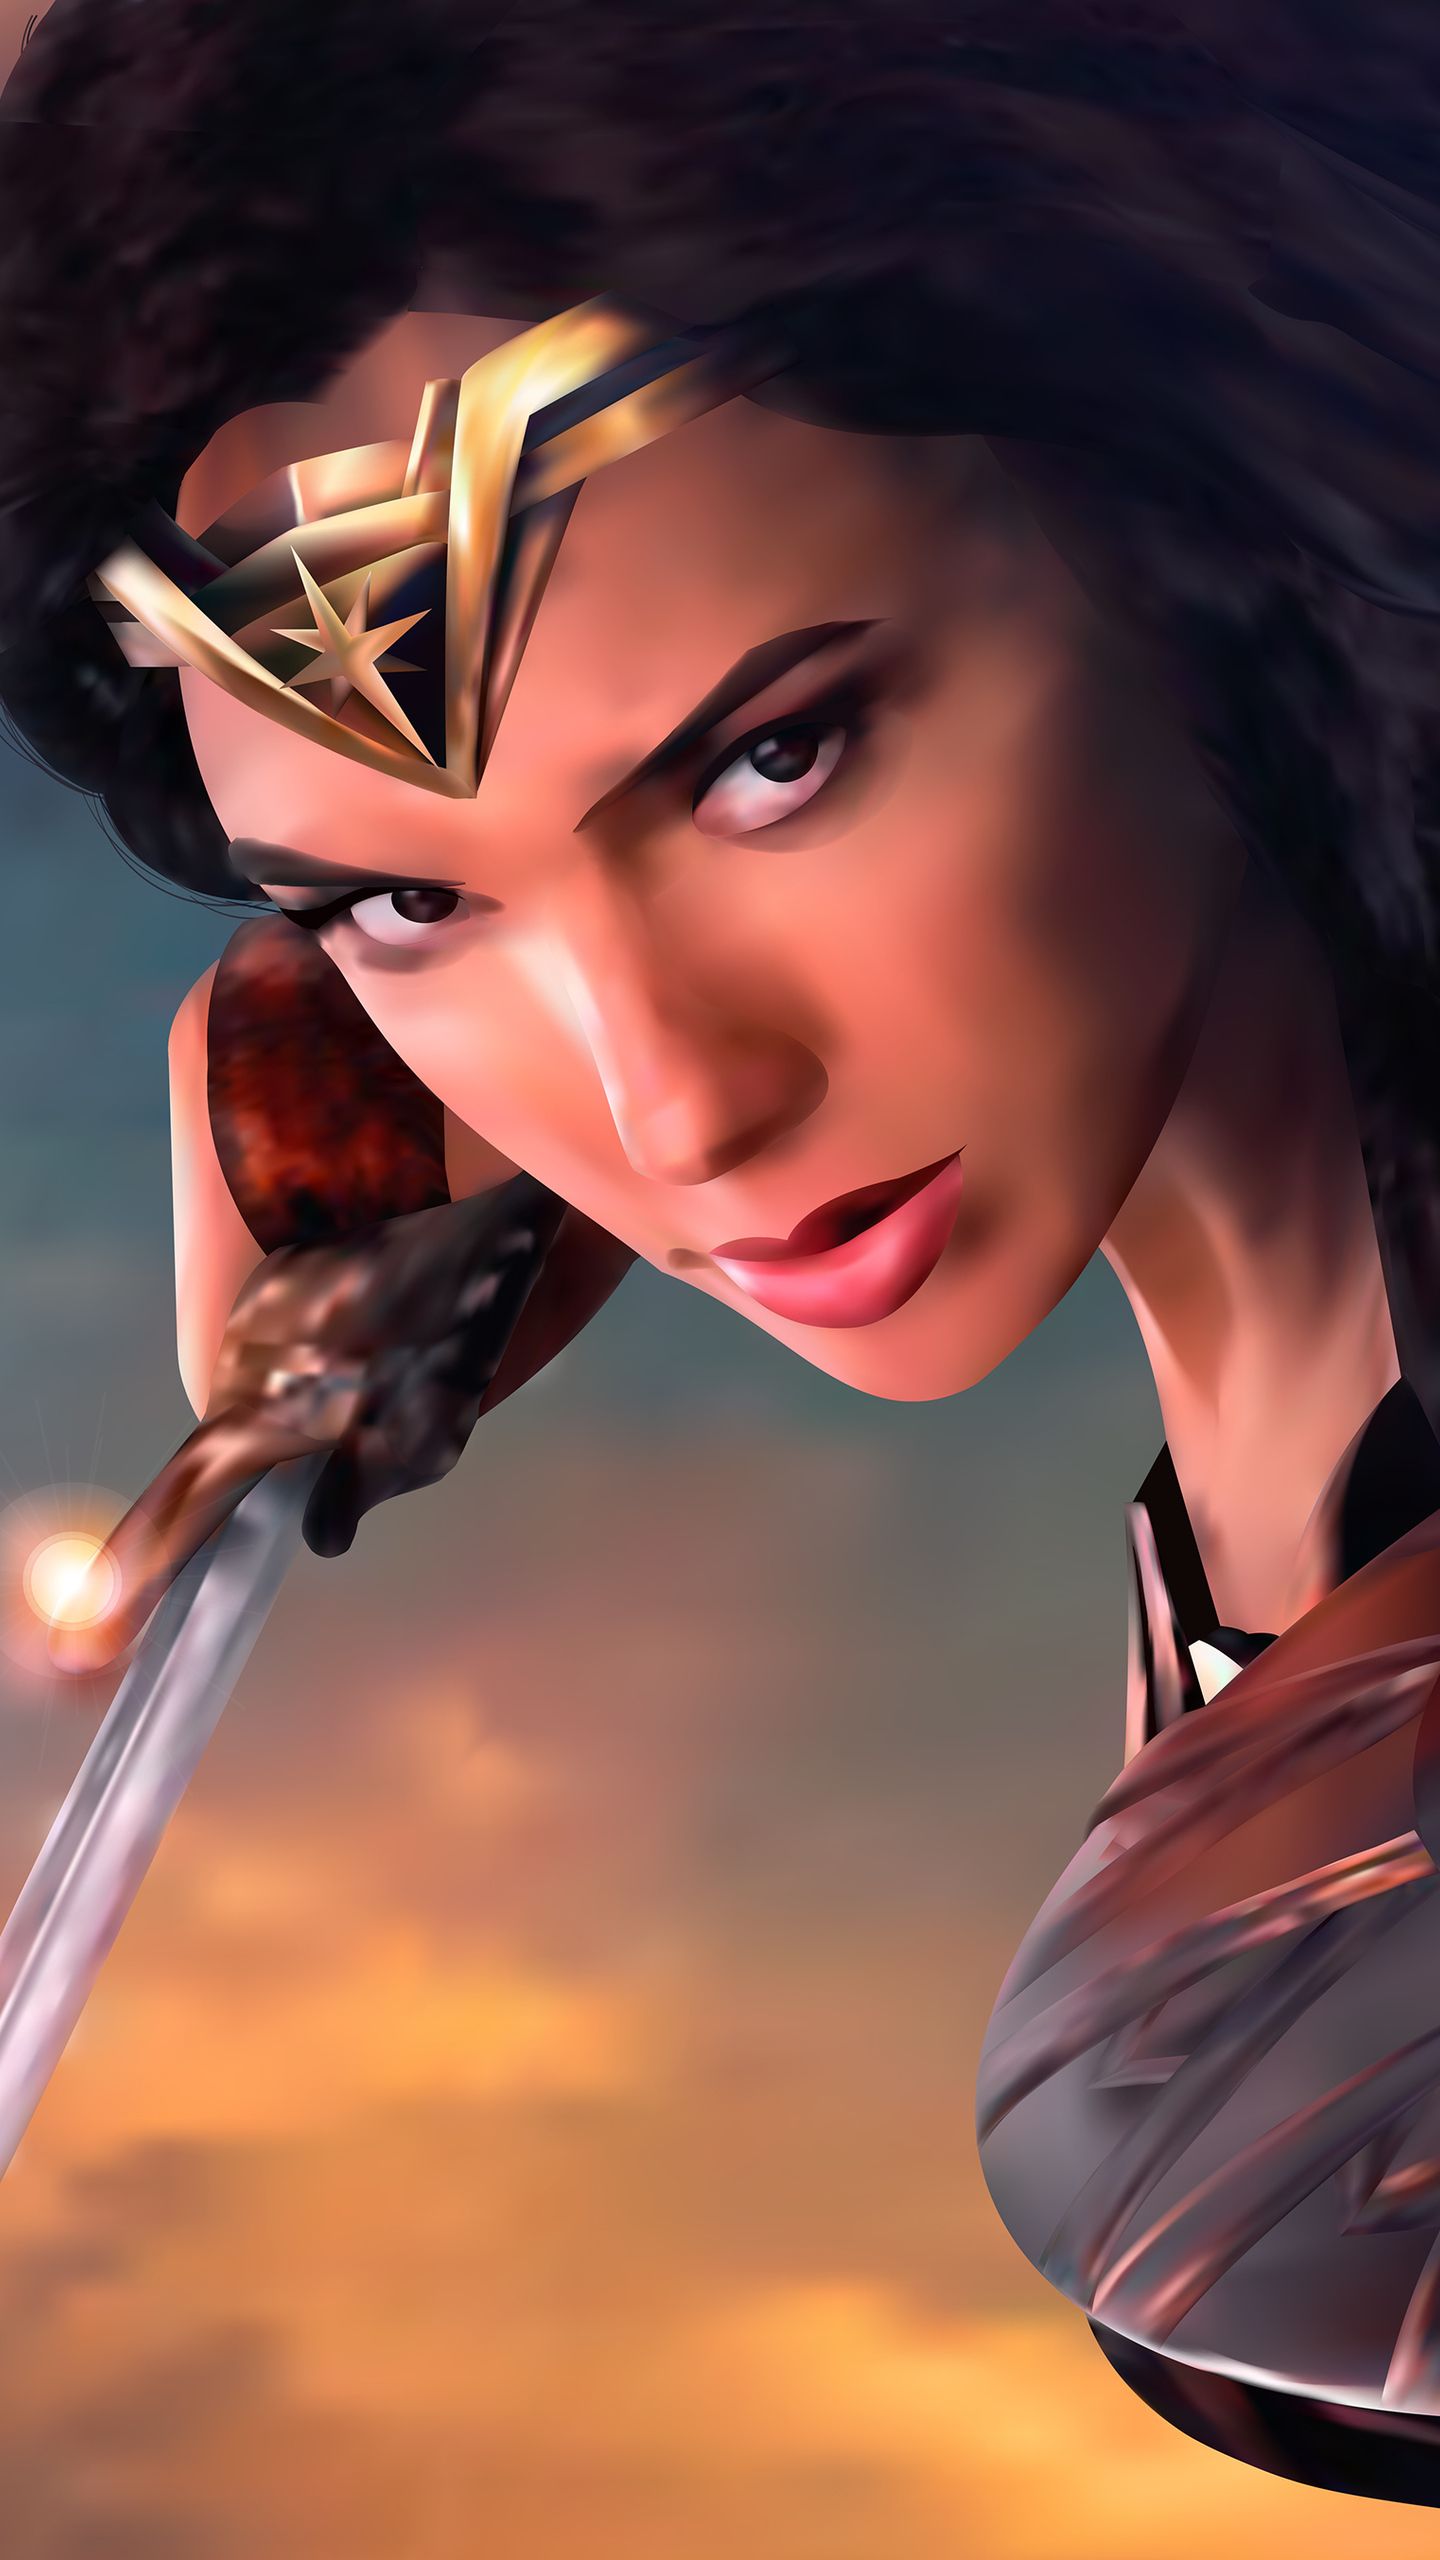 WONDER WOMAN 1984: EVERYTHING YOU NEED TO KNOW, Gal Gadot. Must